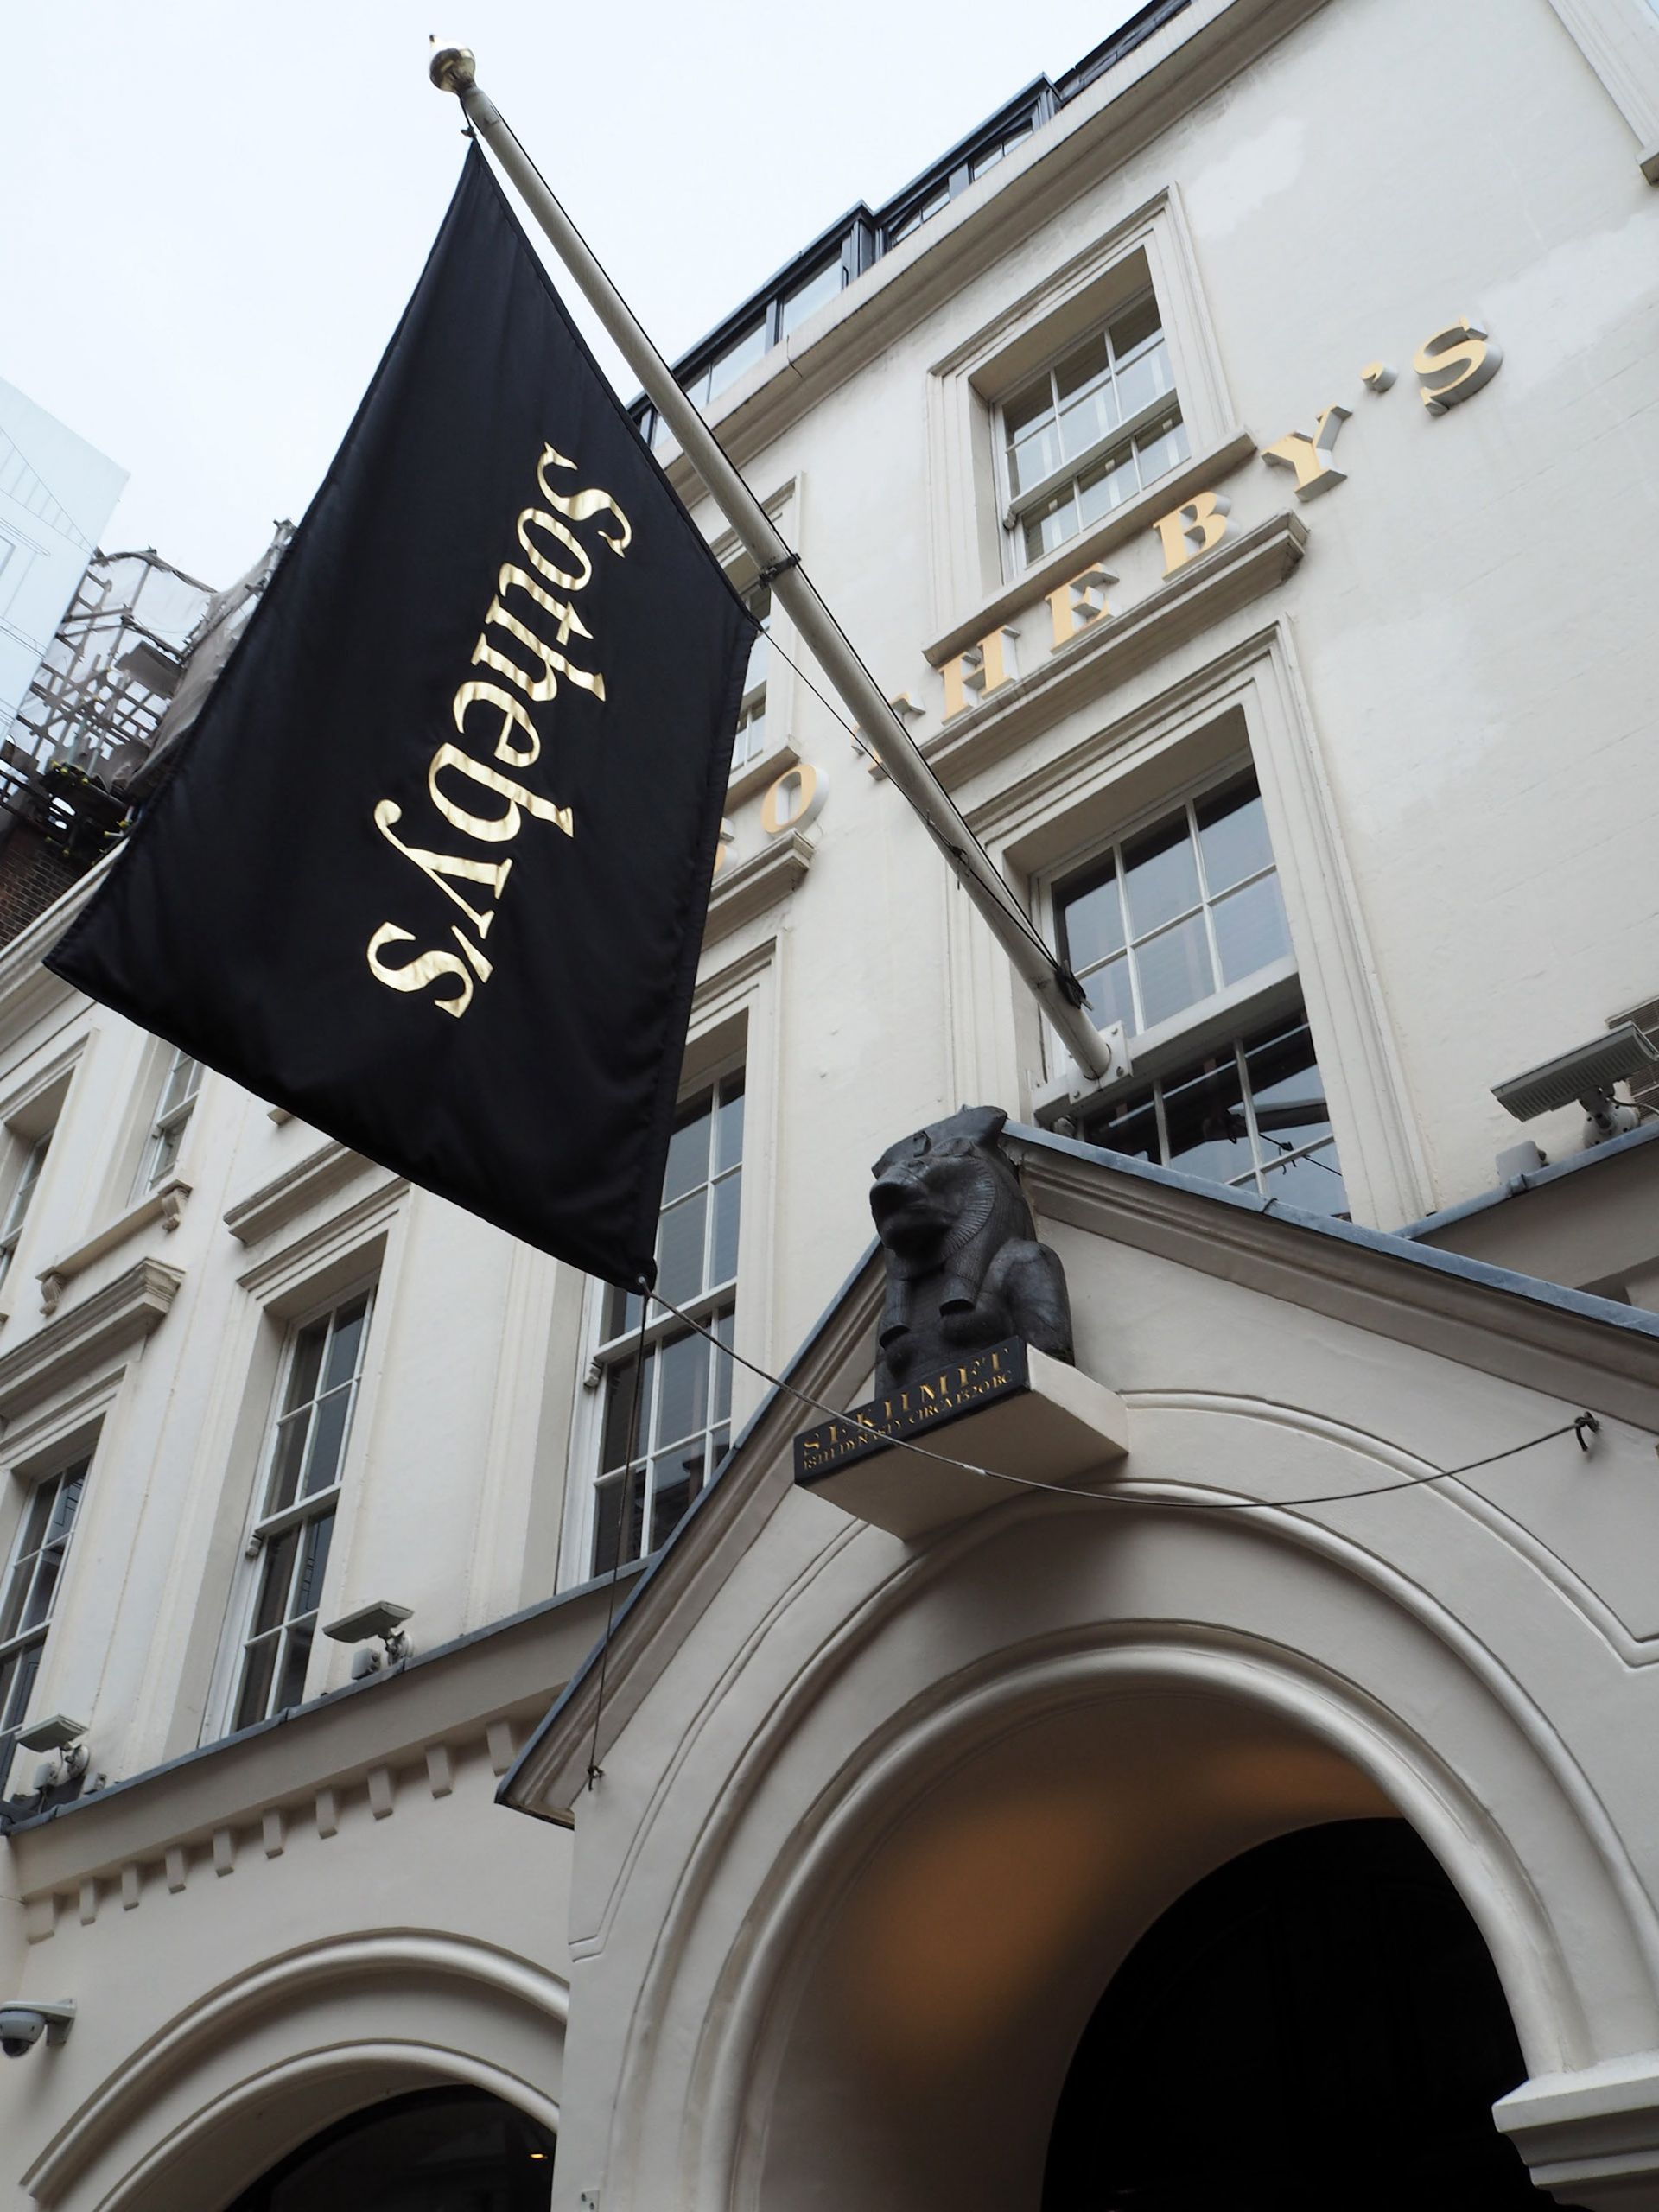 Sotheby's London headquarters on New Bond Street, where the house's sales of Russian art were typically held in June Photo by Ungry Young Man, via Flickr